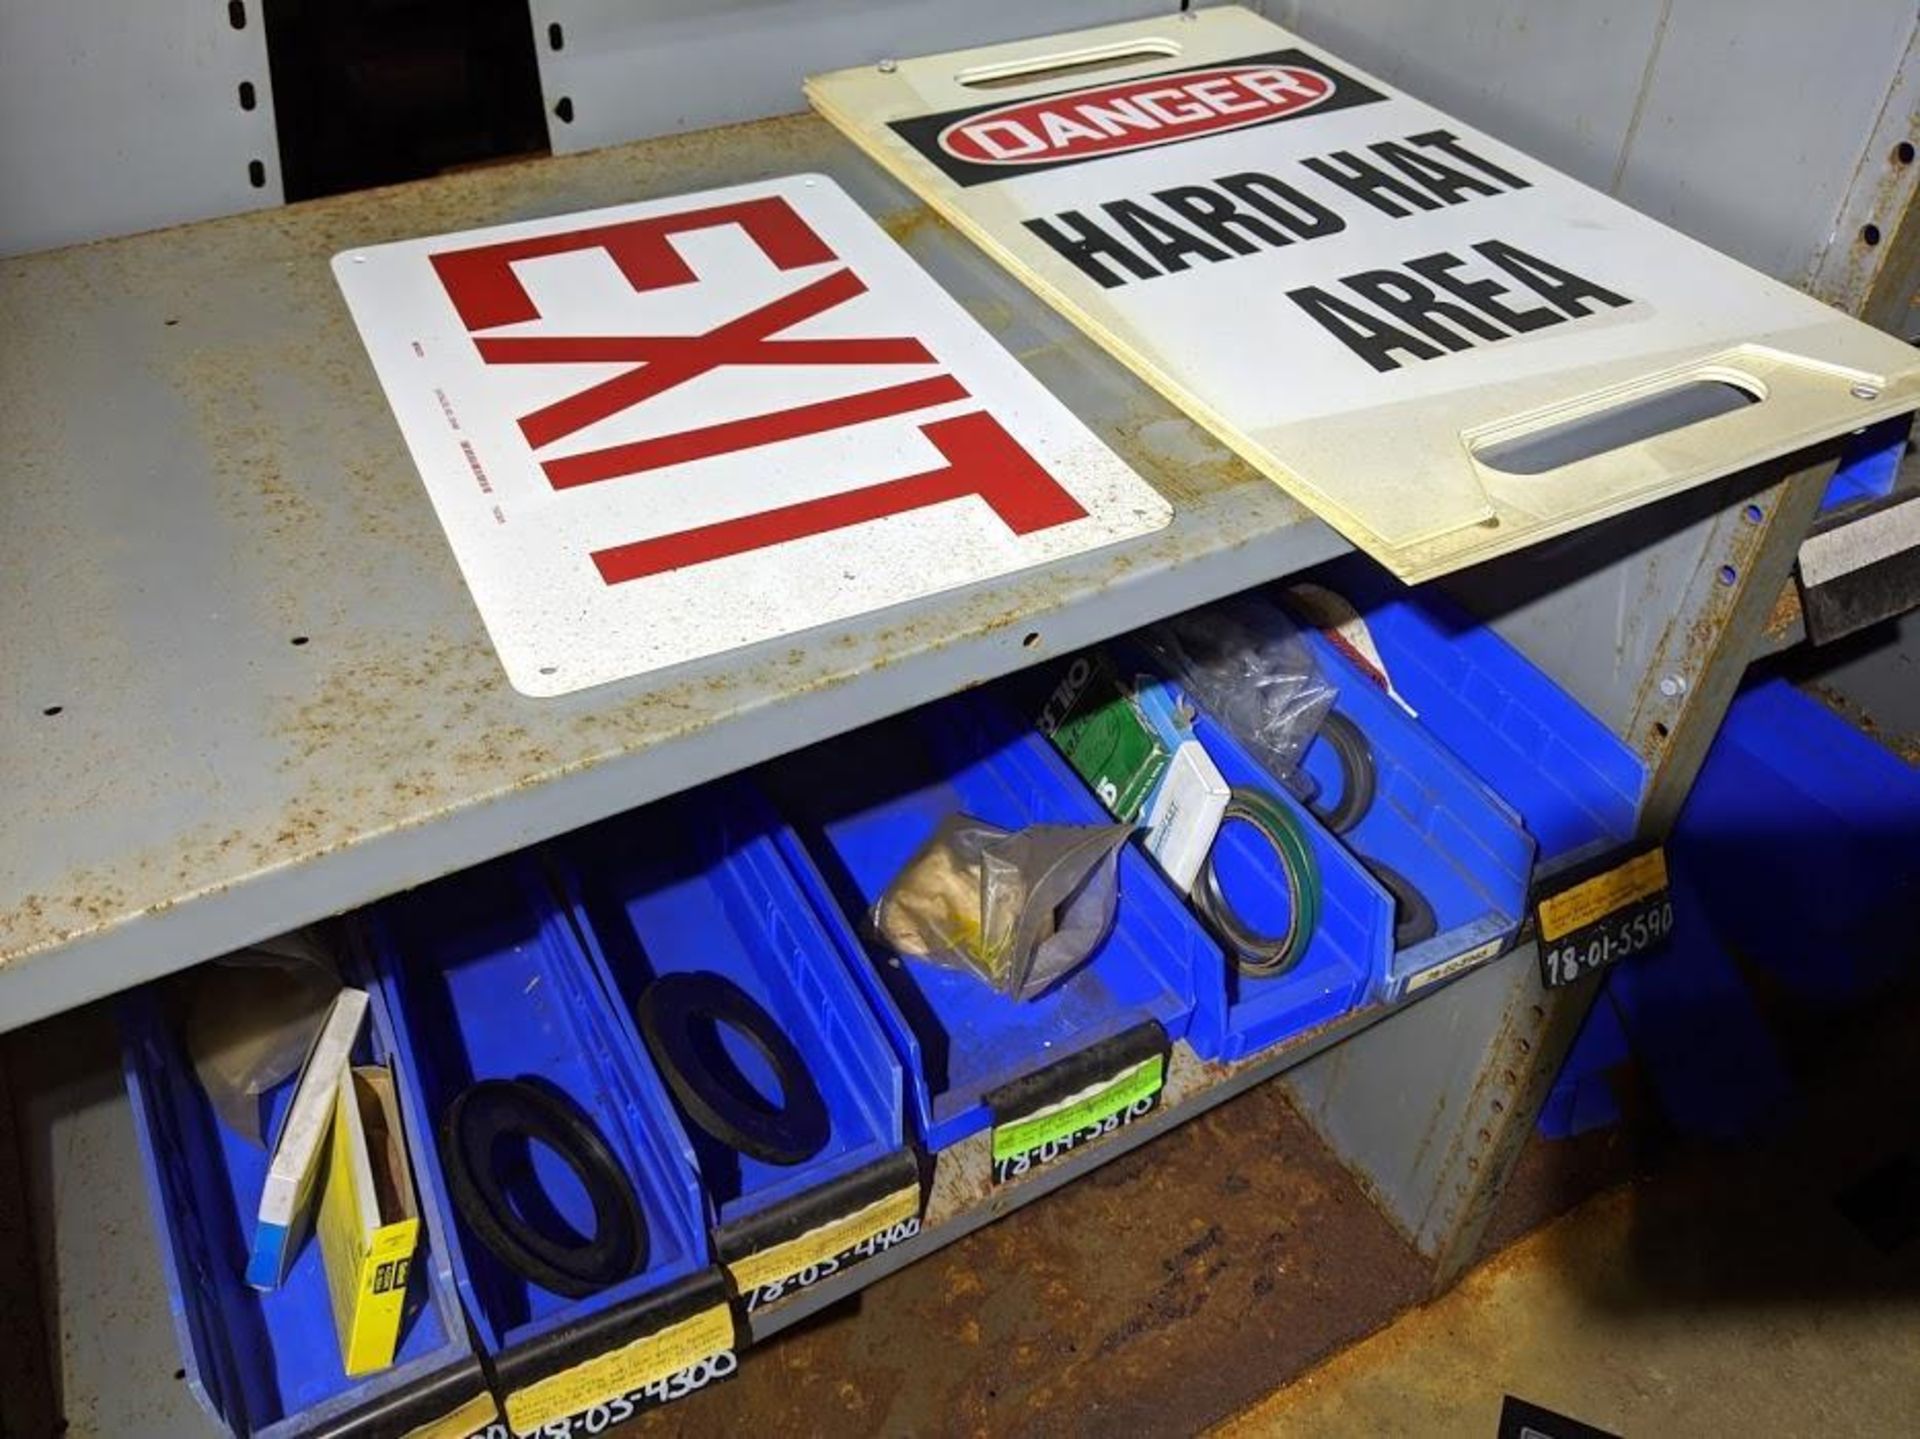 LOT OF MISC MRO TAGS, FACILITY SAFETY SIGNS, SAFETY SHIELDS, RESPIRATORS, SEALS - Image 4 of 5